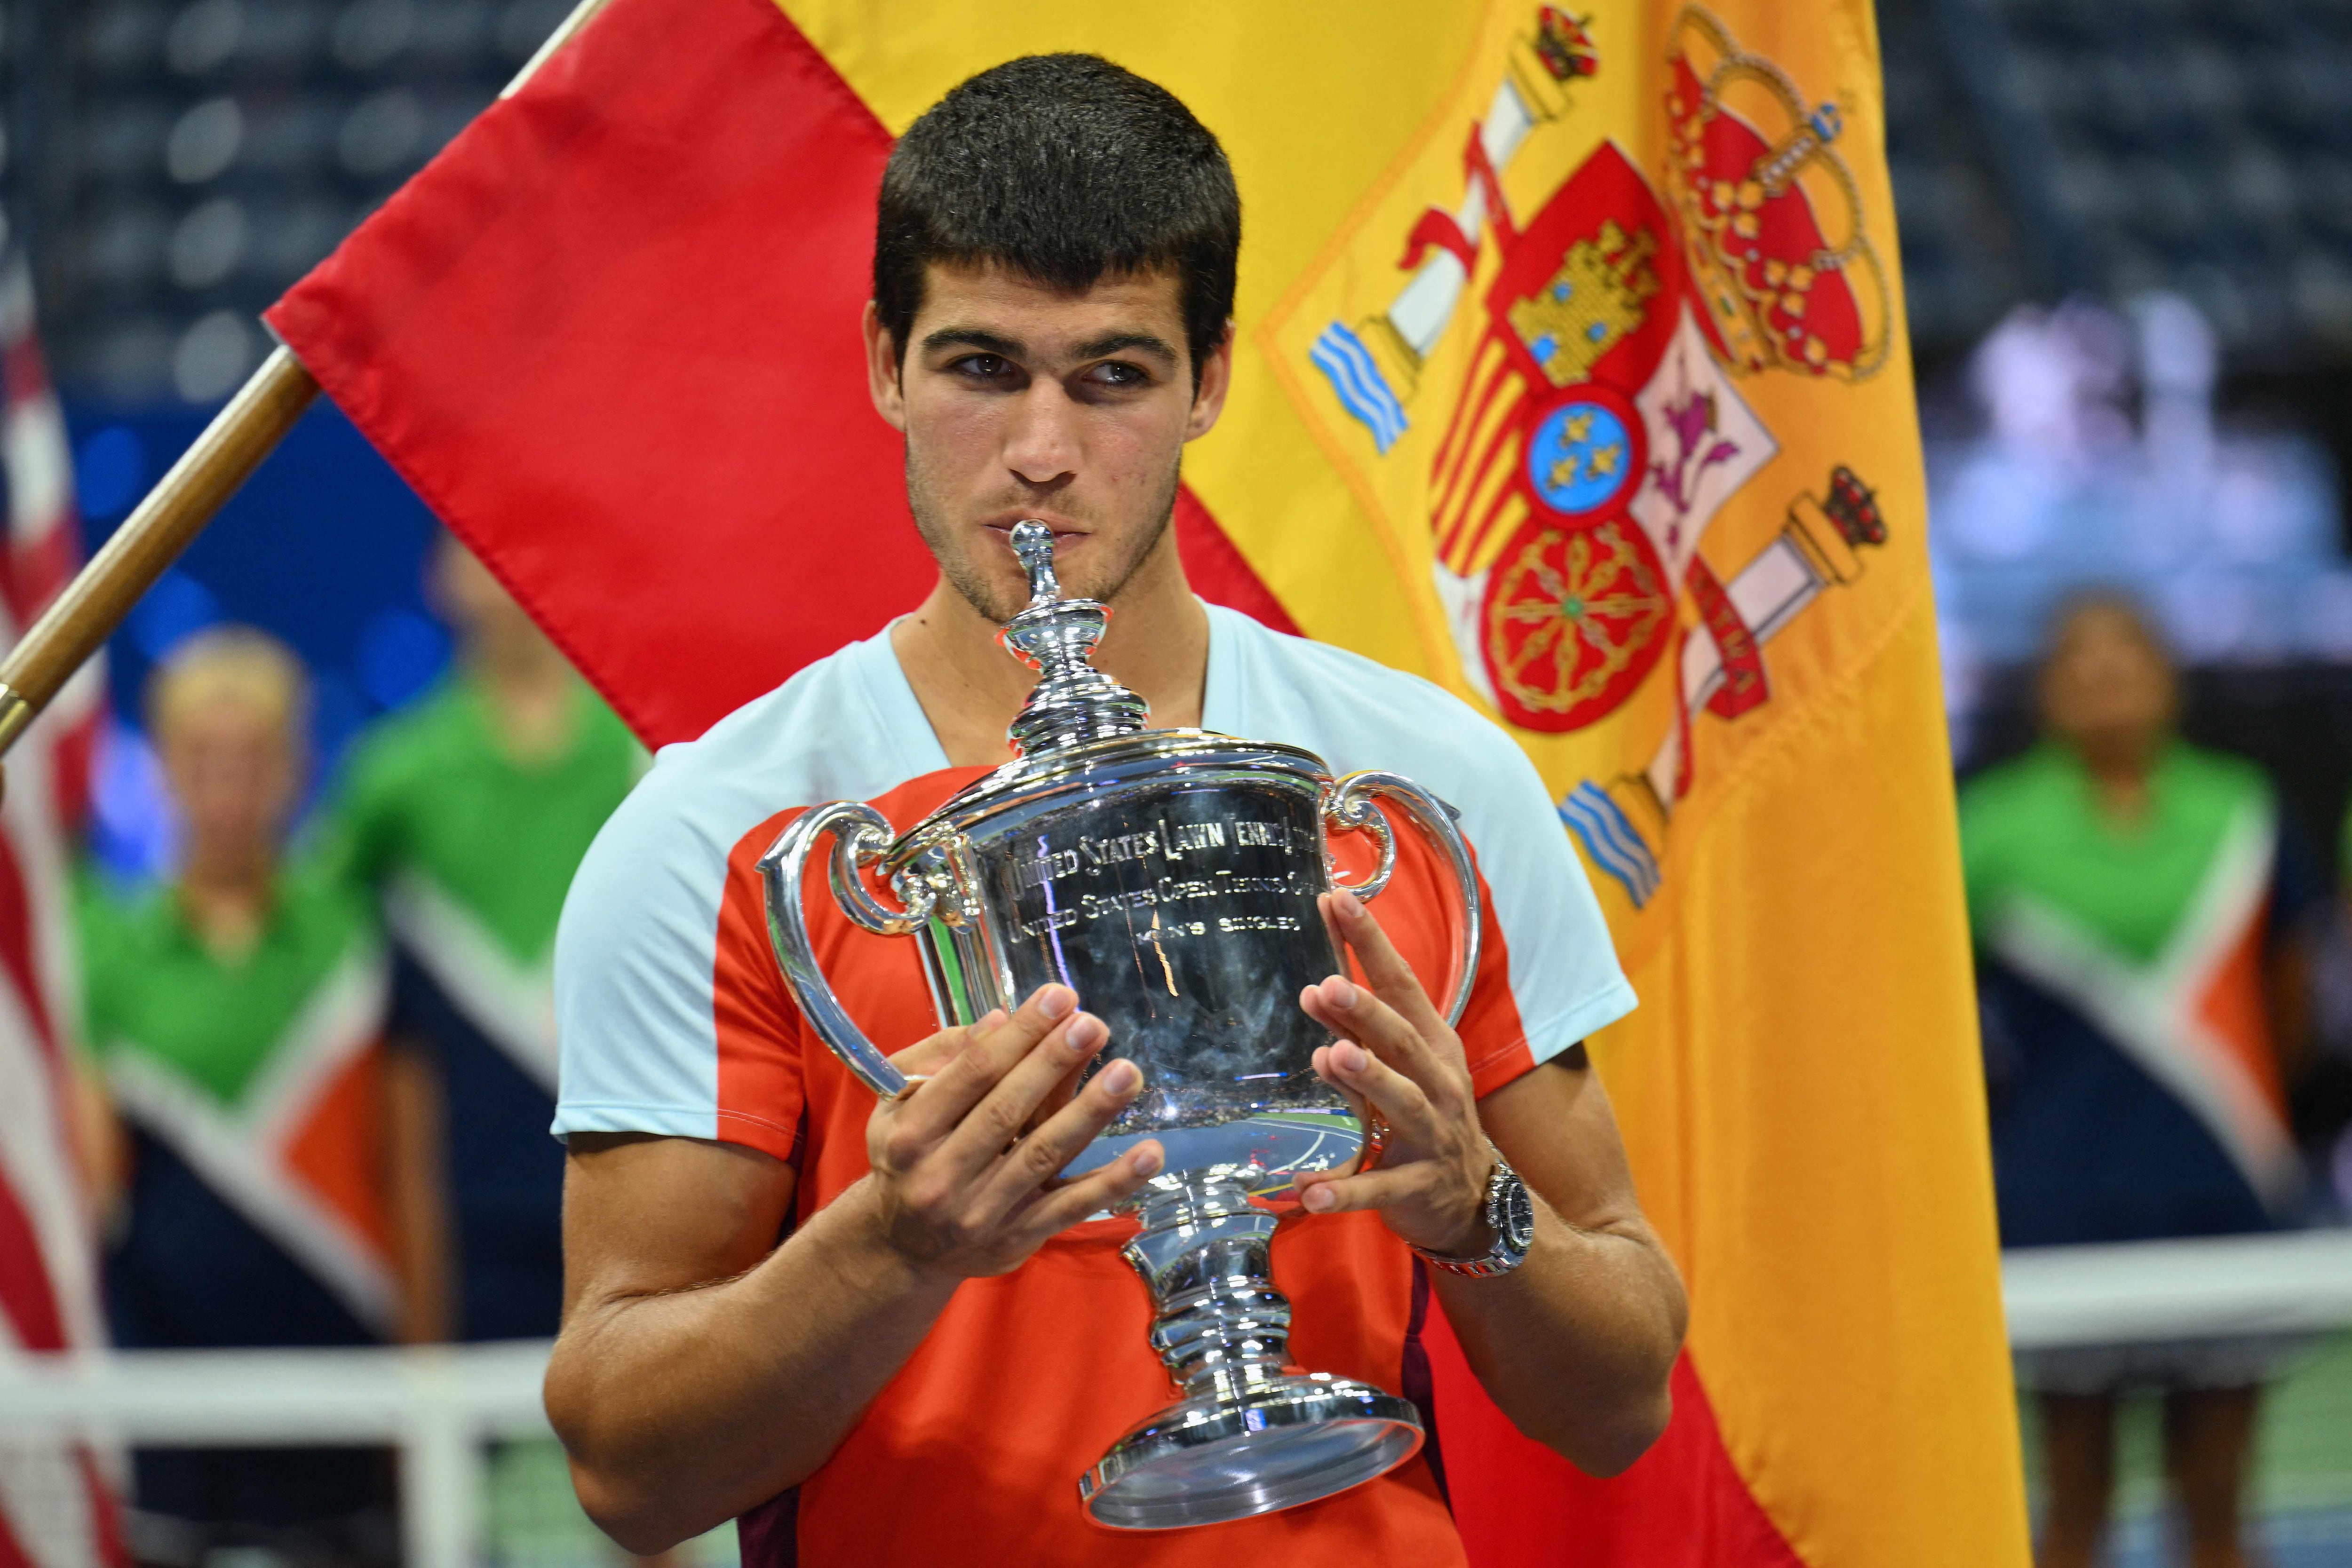 (FILES) In this file photo taken on September 12, 2022 Spain's Carlos Alcaraz celebrates with the trophy after winning against Norway's Casper Ruud during their 2022 US Open Tennis tournament men's singles final match at the USTA Billie Jean King National Tennis Center in New York. - Carlos Alcaraz wins the US Open and becomes the youngest ever world number one at 19. (Photo by ANGELA WEISS / AFP)